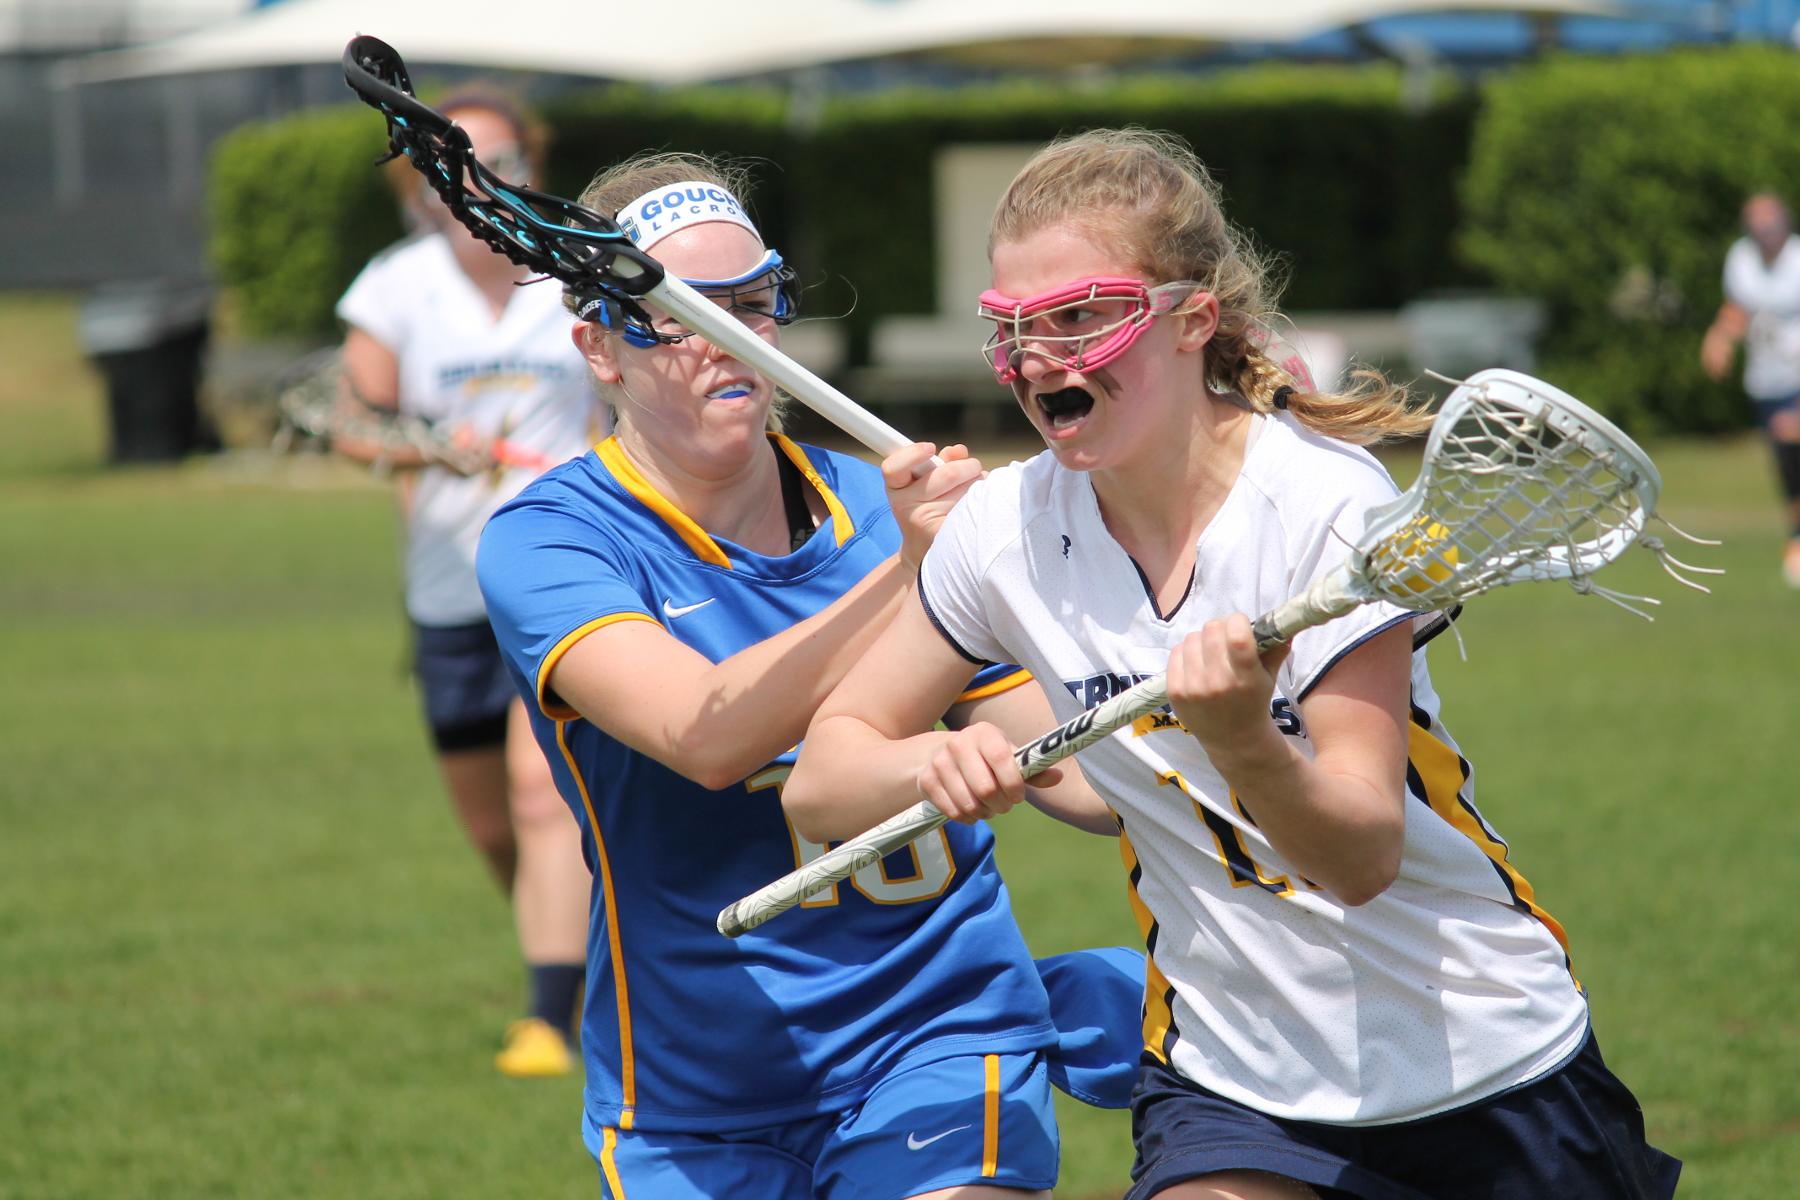 Cutler paces MCLA as they breeze past Green Mountain in women's lacrosse